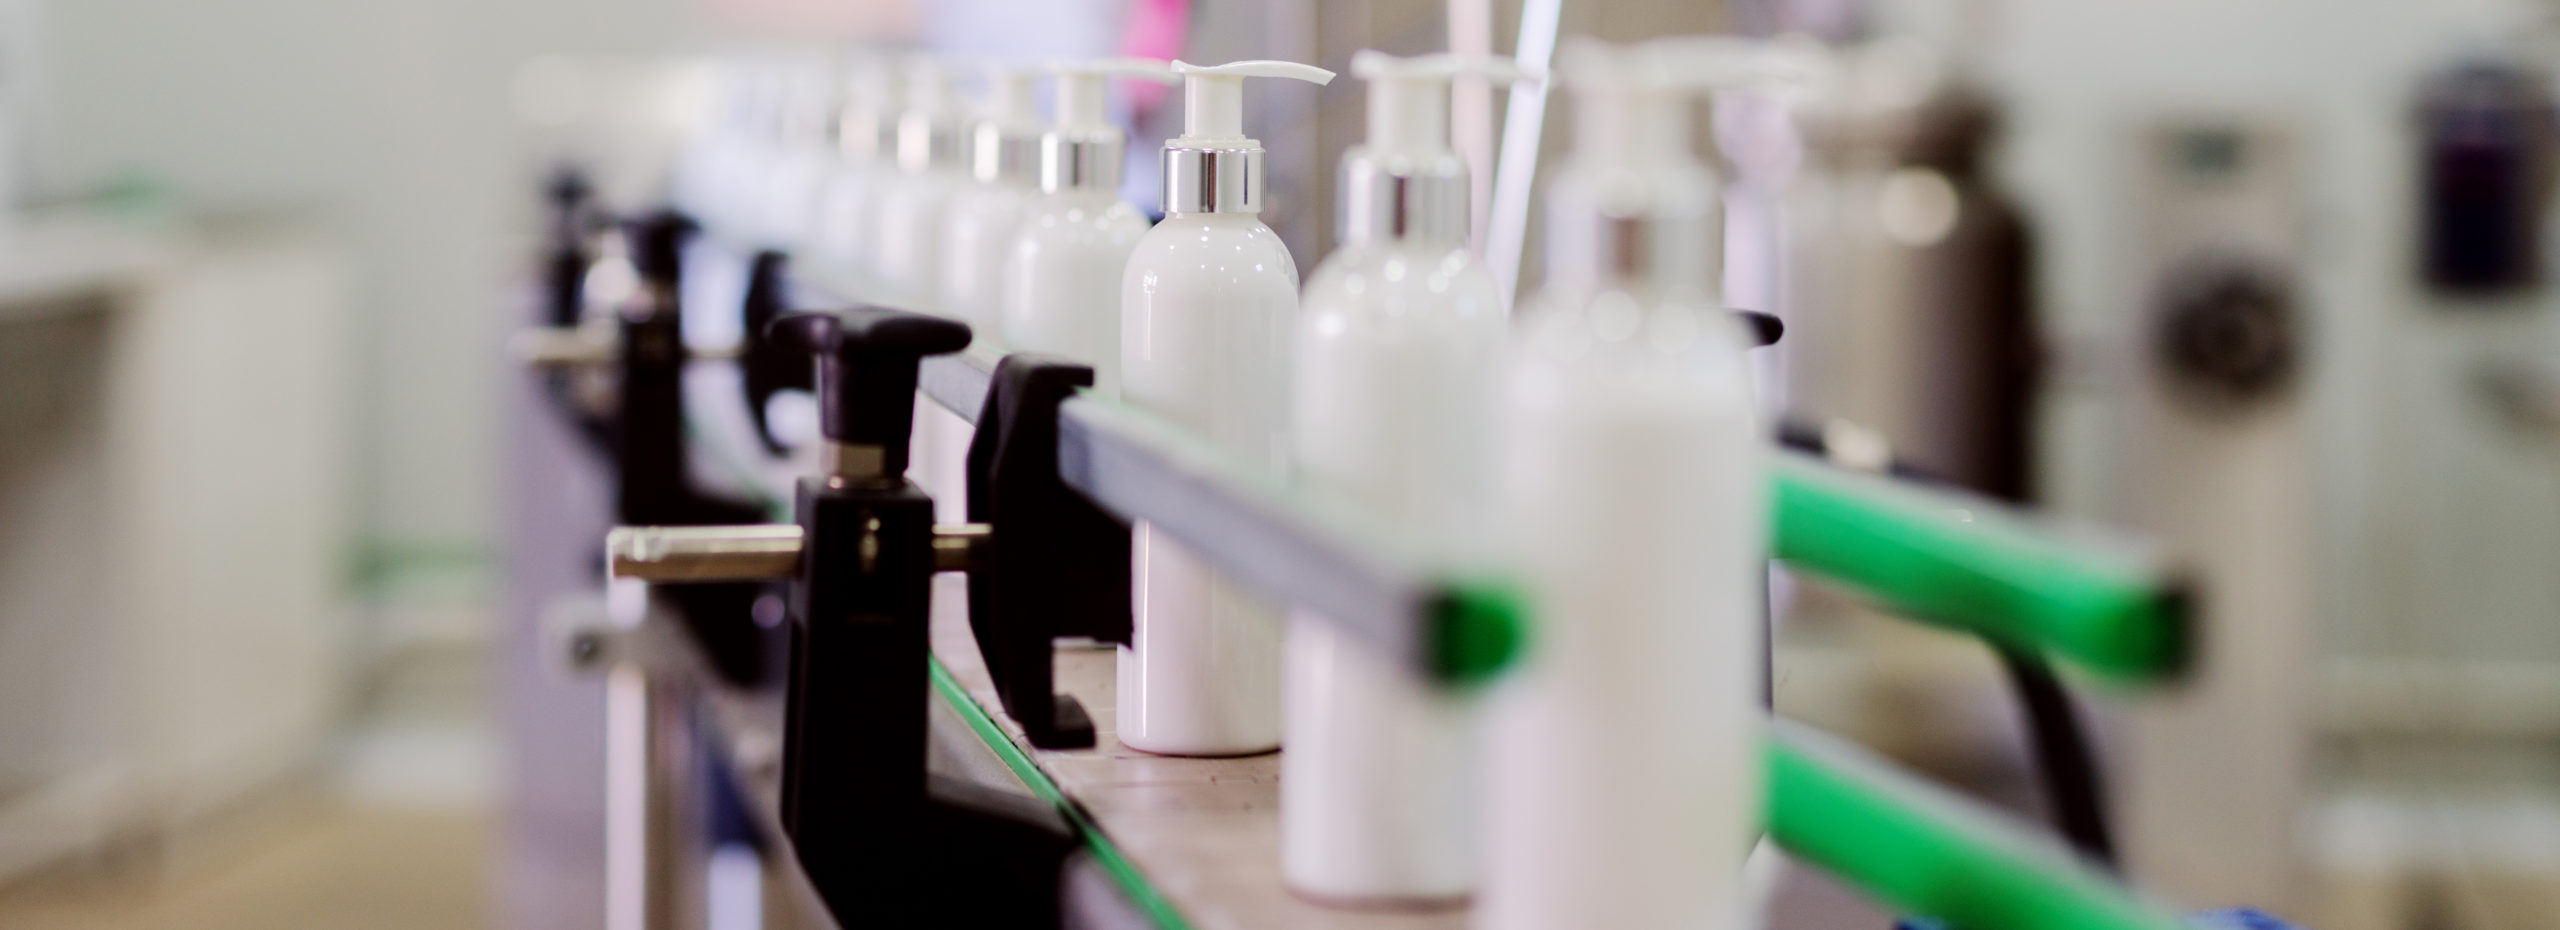 Picture,Of,Lotion,Bottles,On,Production,Line.,Bottles,Of,Cosmetic